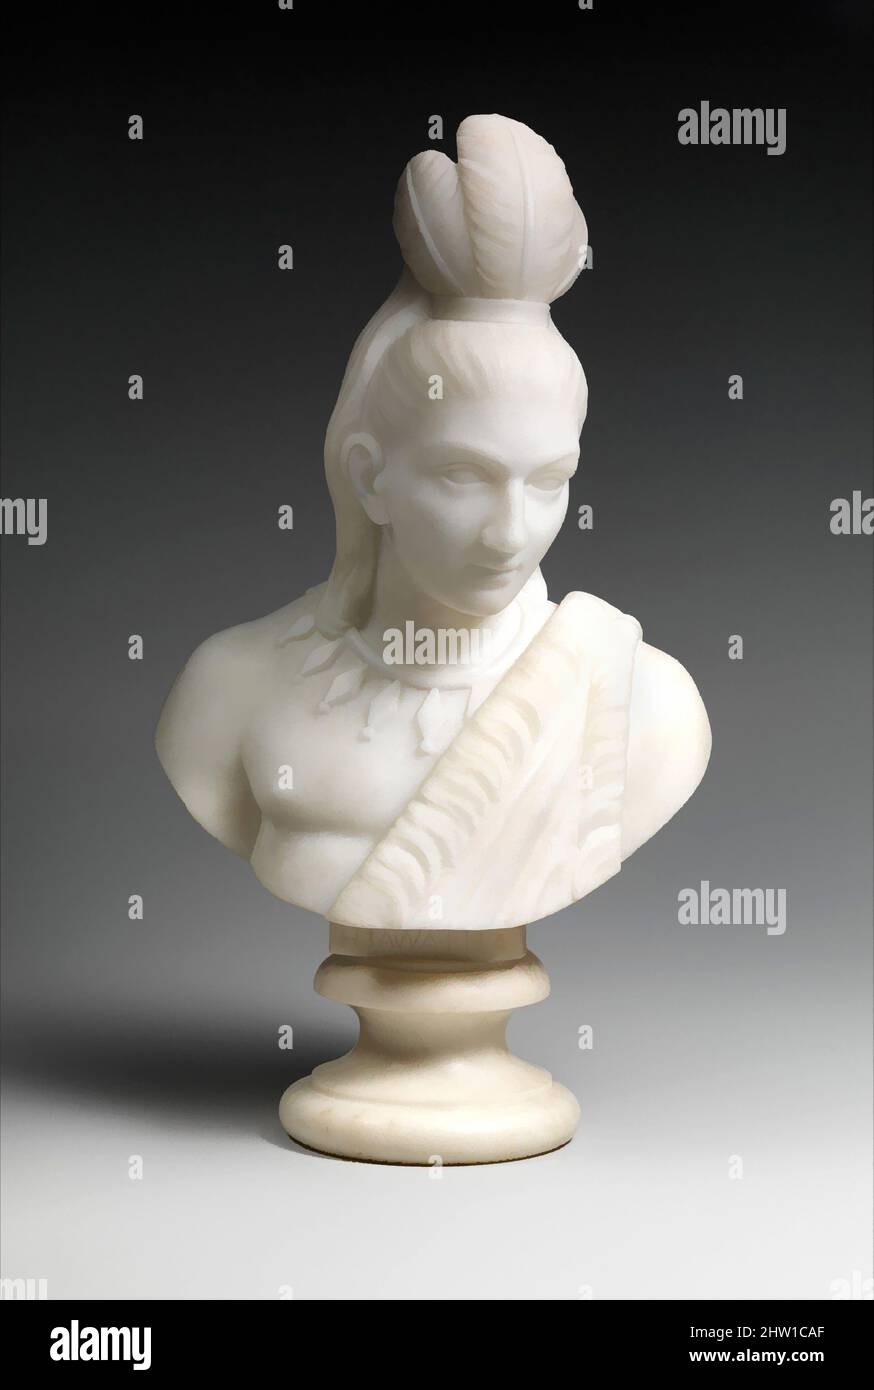 Art inspired by Hiawatha, 1868, Made in Rome, Italy, Marble, 13 3/4 × 7 3/4 × 5 1/2 in. (34.9 × 19.7 × 14 cm), Sculpture, Edmonia Lewis (American, 1844–1907), Like many American sculptors of the nineteenth century, Lewis, an artist of African-American and Chippewa (Ojibwa) ancestry, Classic works modernized by Artotop with a splash of modernity. Shapes, color and value, eye-catching visual impact on art. Emotions through freedom of artworks in a contemporary way. A timeless message pursuing a wildly creative new direction. Artists turning to the digital medium and creating the Artotop NFT Stock Photo